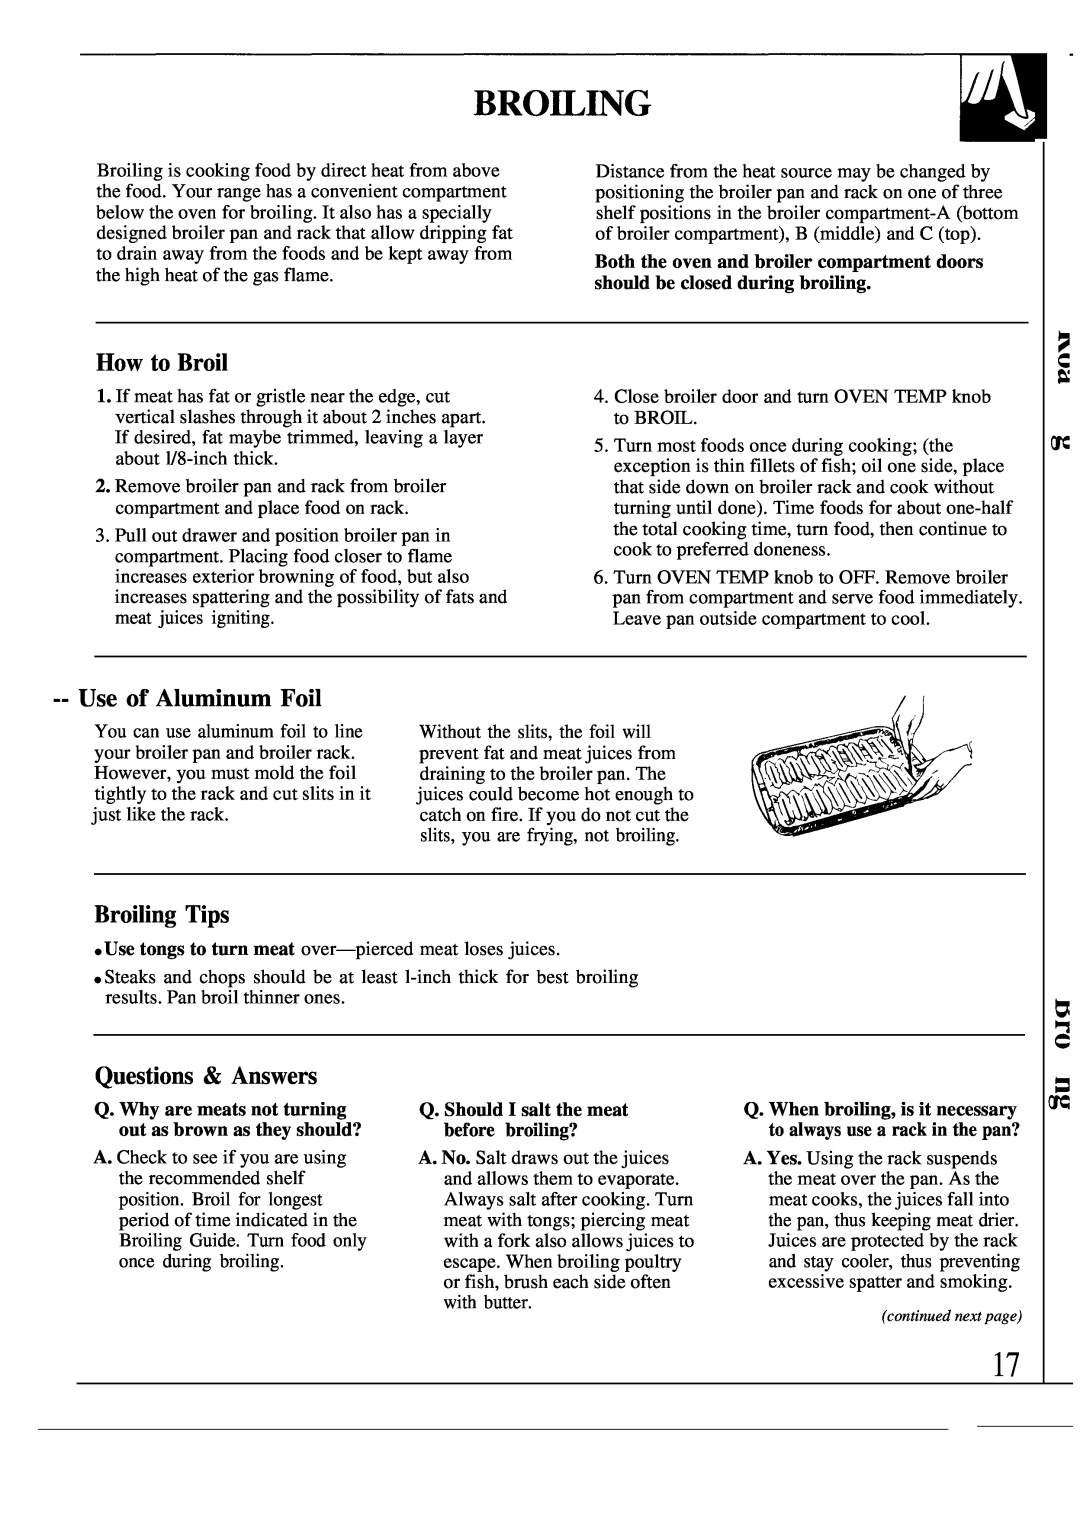 GE JGSC12GER, MNU109I, 49-8319, 164 D2588P120 How to Broil, Use of Aluminum Foil, Broiling Tips, Questions & Answers 